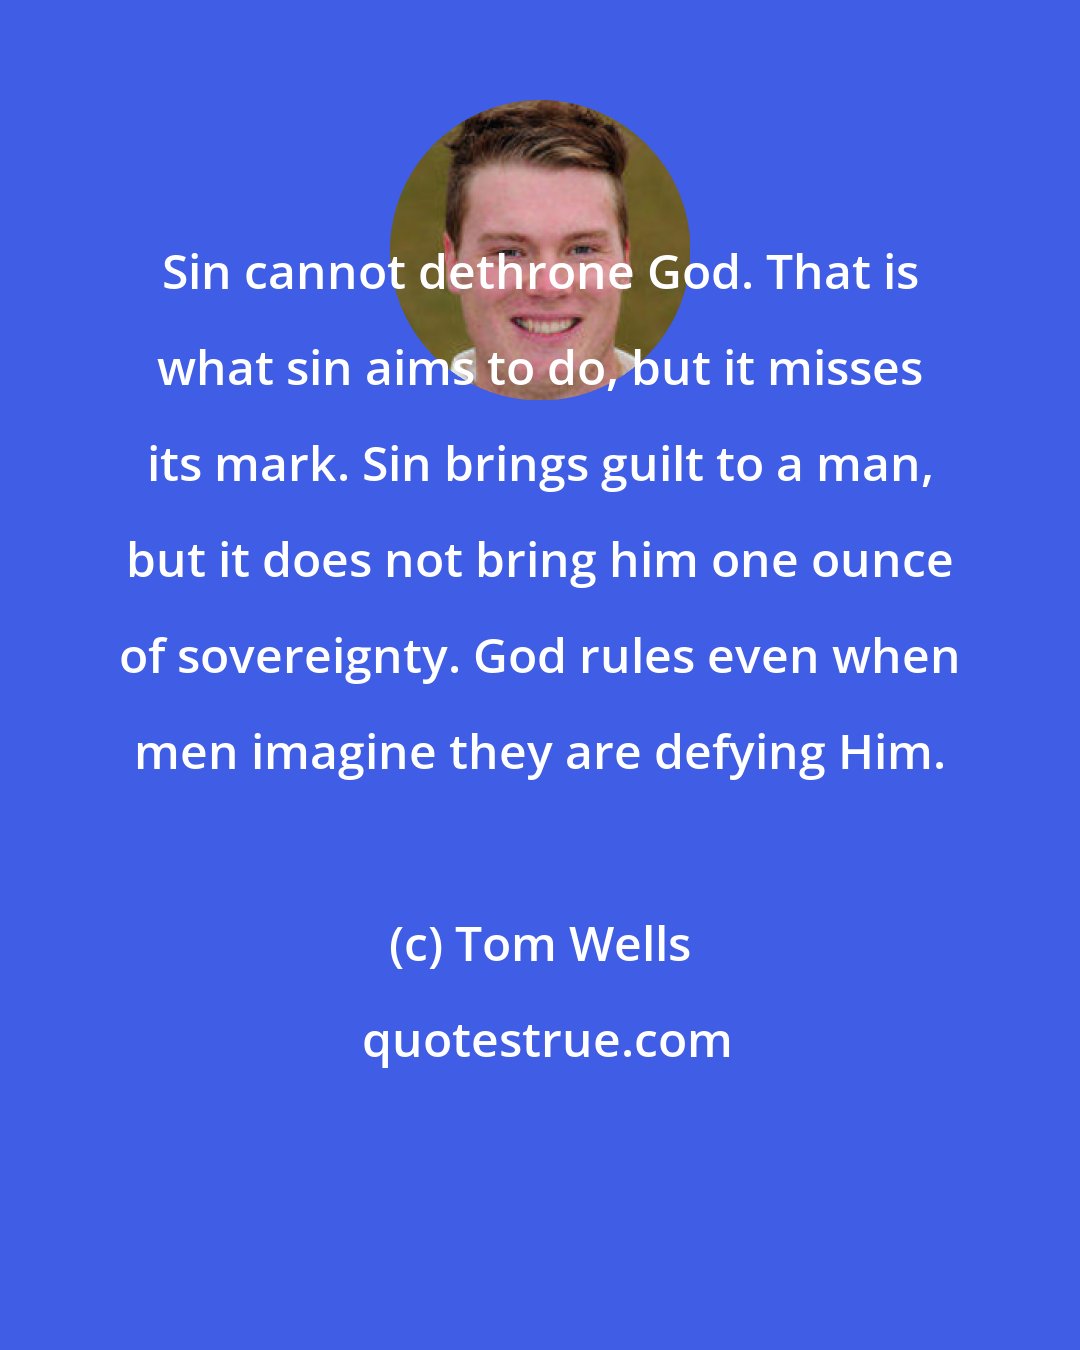 Tom Wells: Sin cannot dethrone God. That is what sin aims to do, but it misses its mark. Sin brings guilt to a man, but it does not bring him one ounce of sovereignty. God rules even when men imagine they are defying Him.